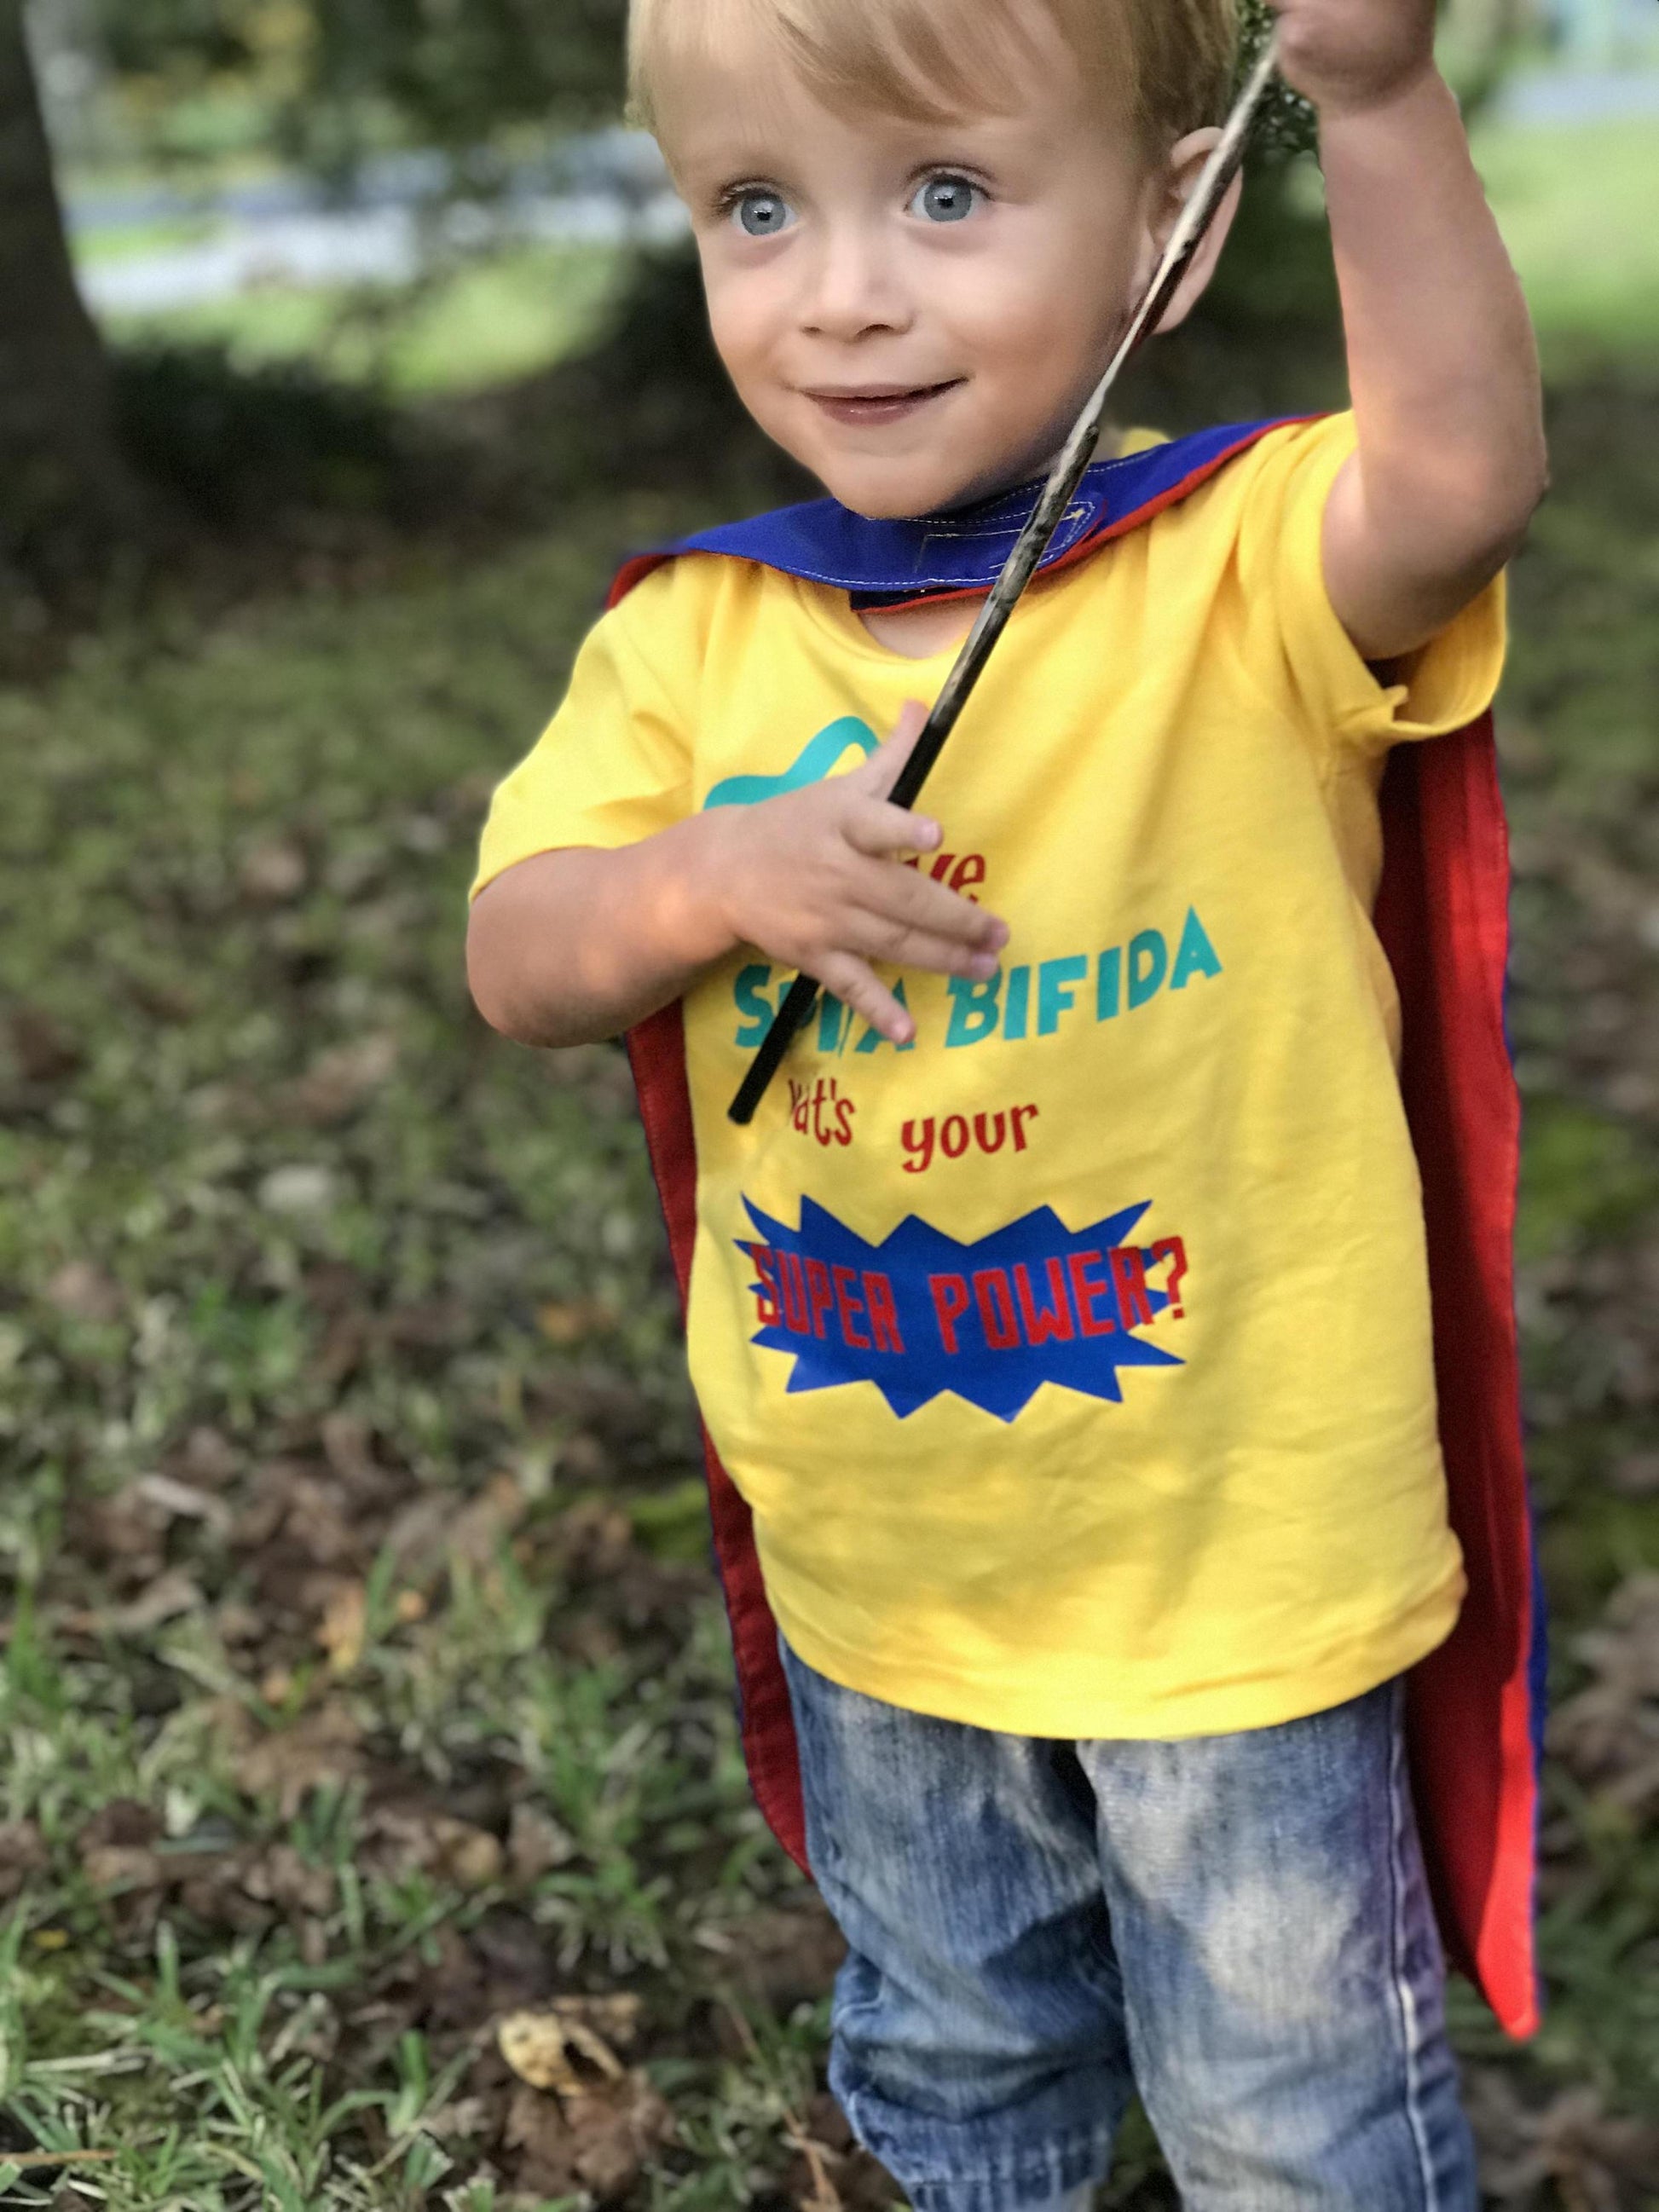 Handcrafted Children's Clothing, Clothing for Children and Parents, Spina Bifida Hero Cape - Super Hero Cape for Special Needs Kids, chi-fashionista